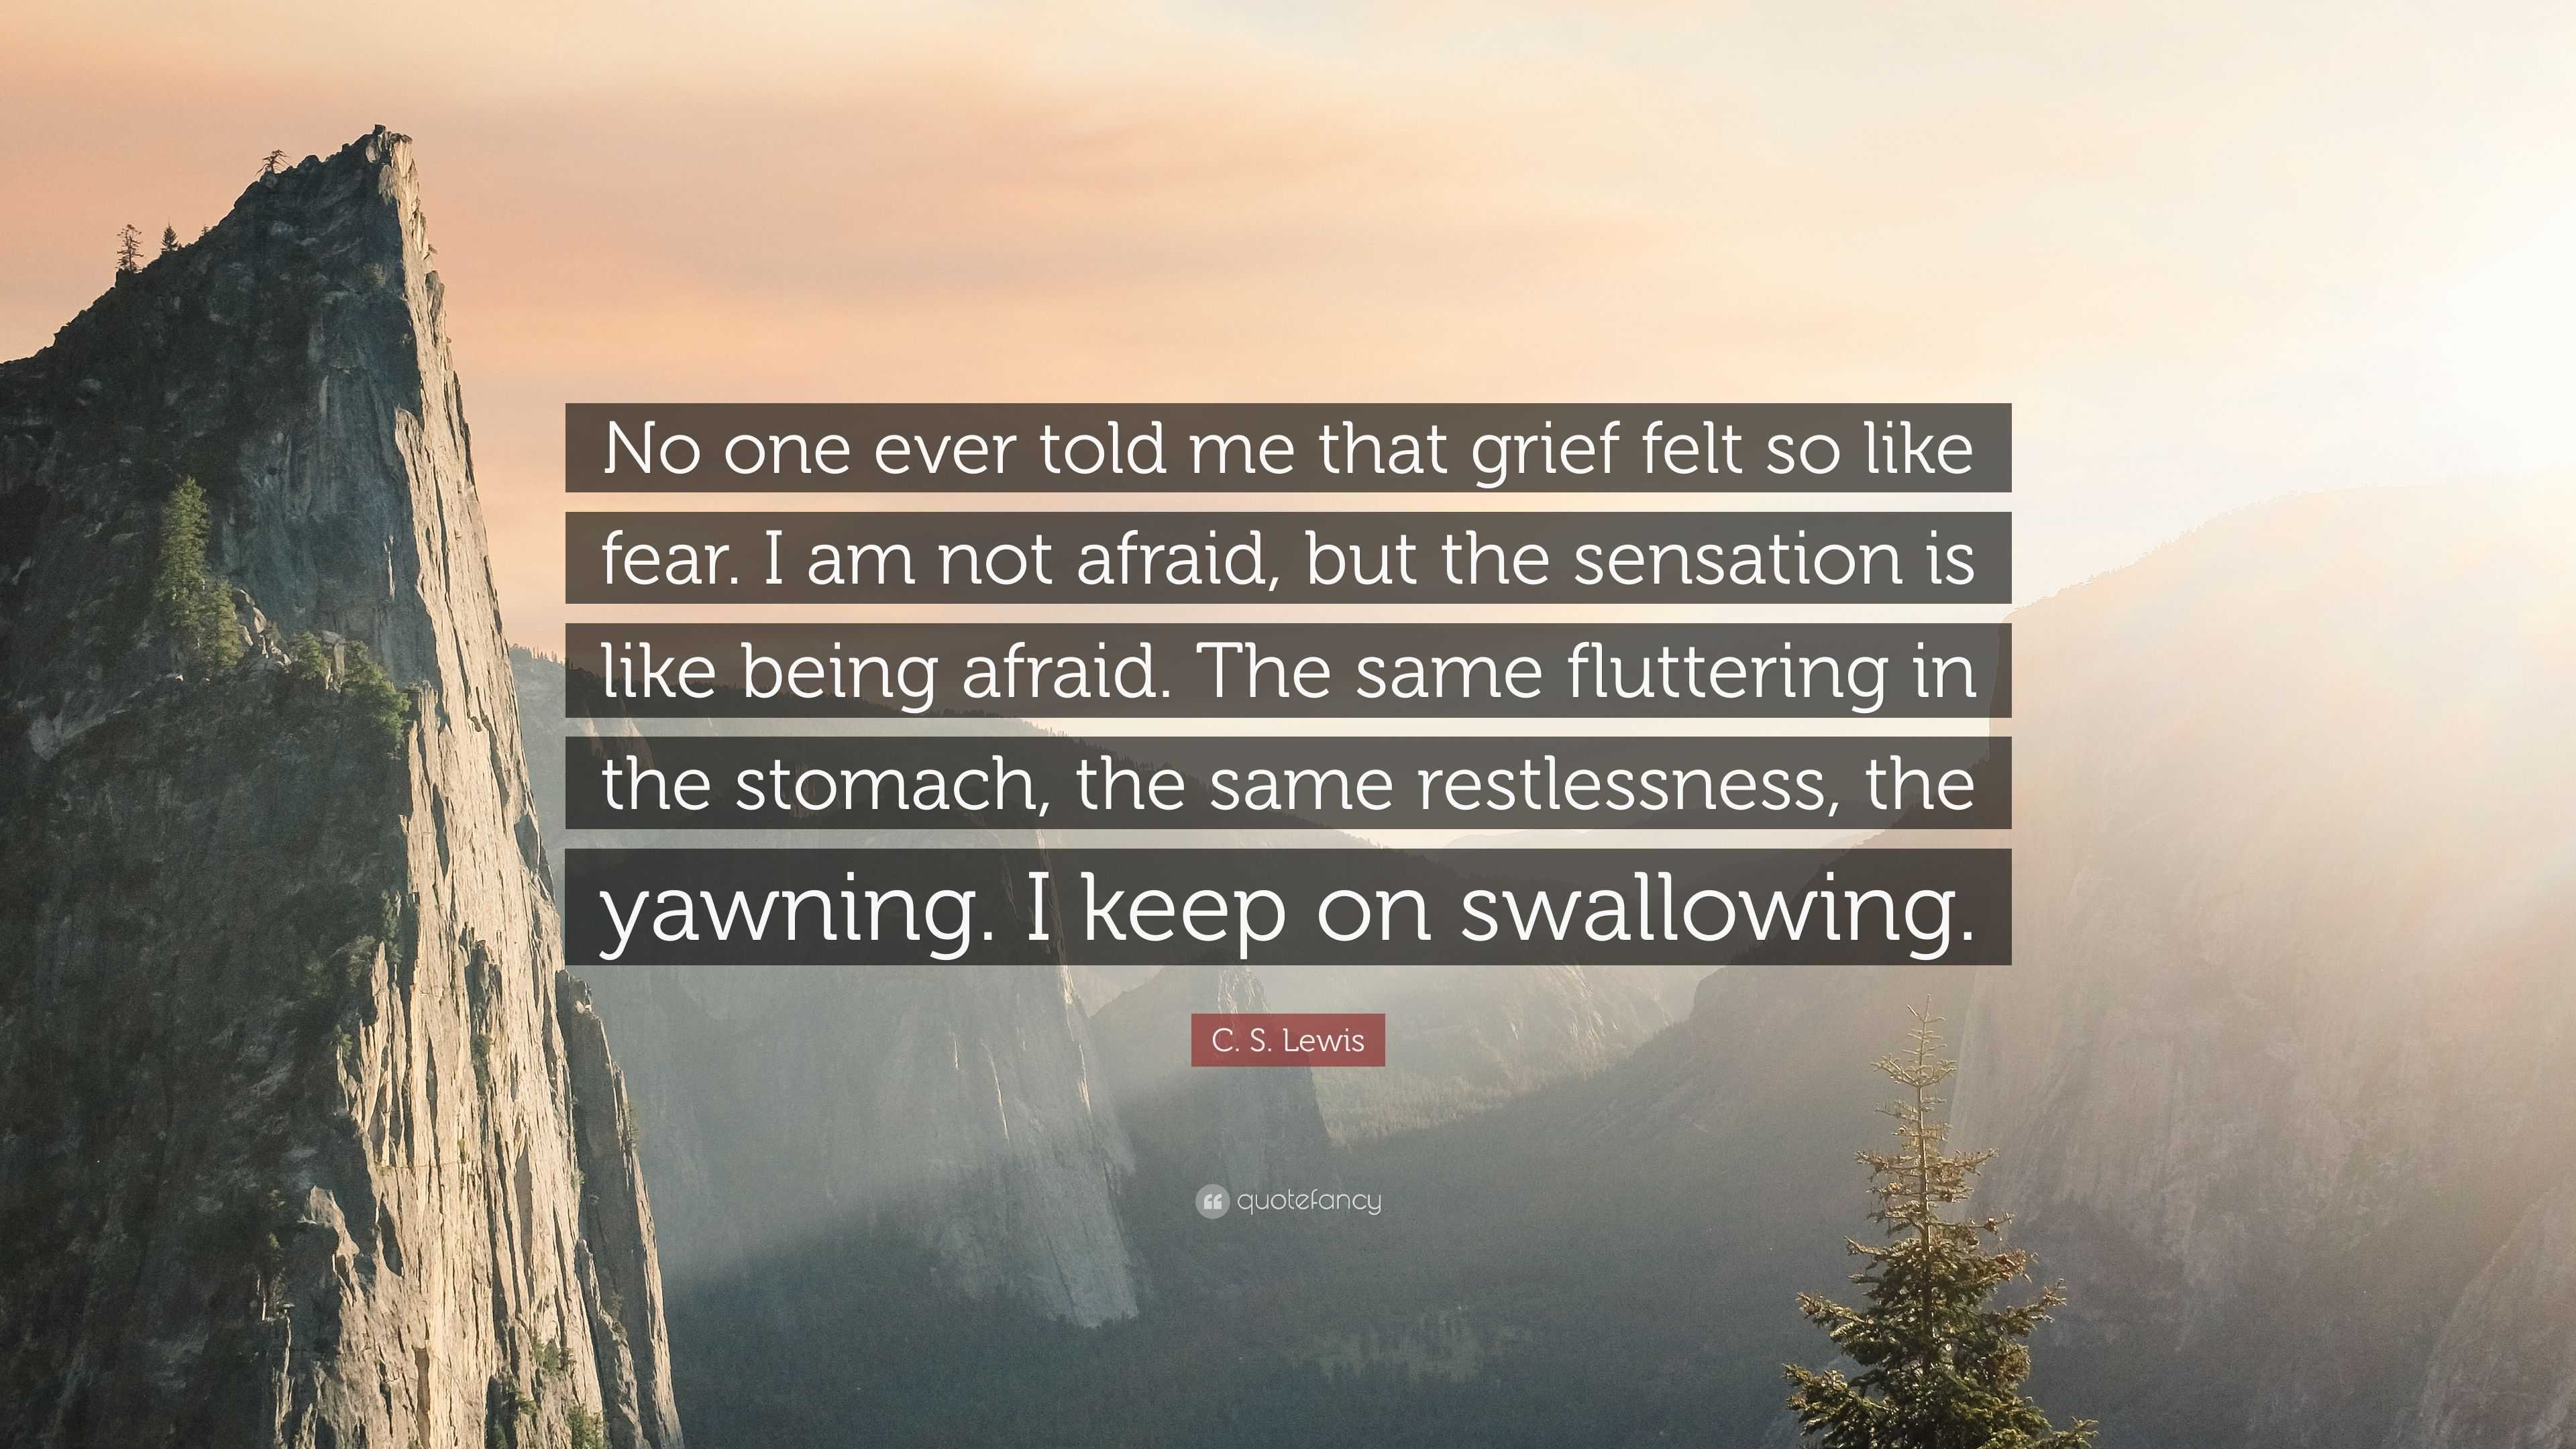 C S Lewis Quote “no One Ever Told Me That Grief Felt So Like Fear I